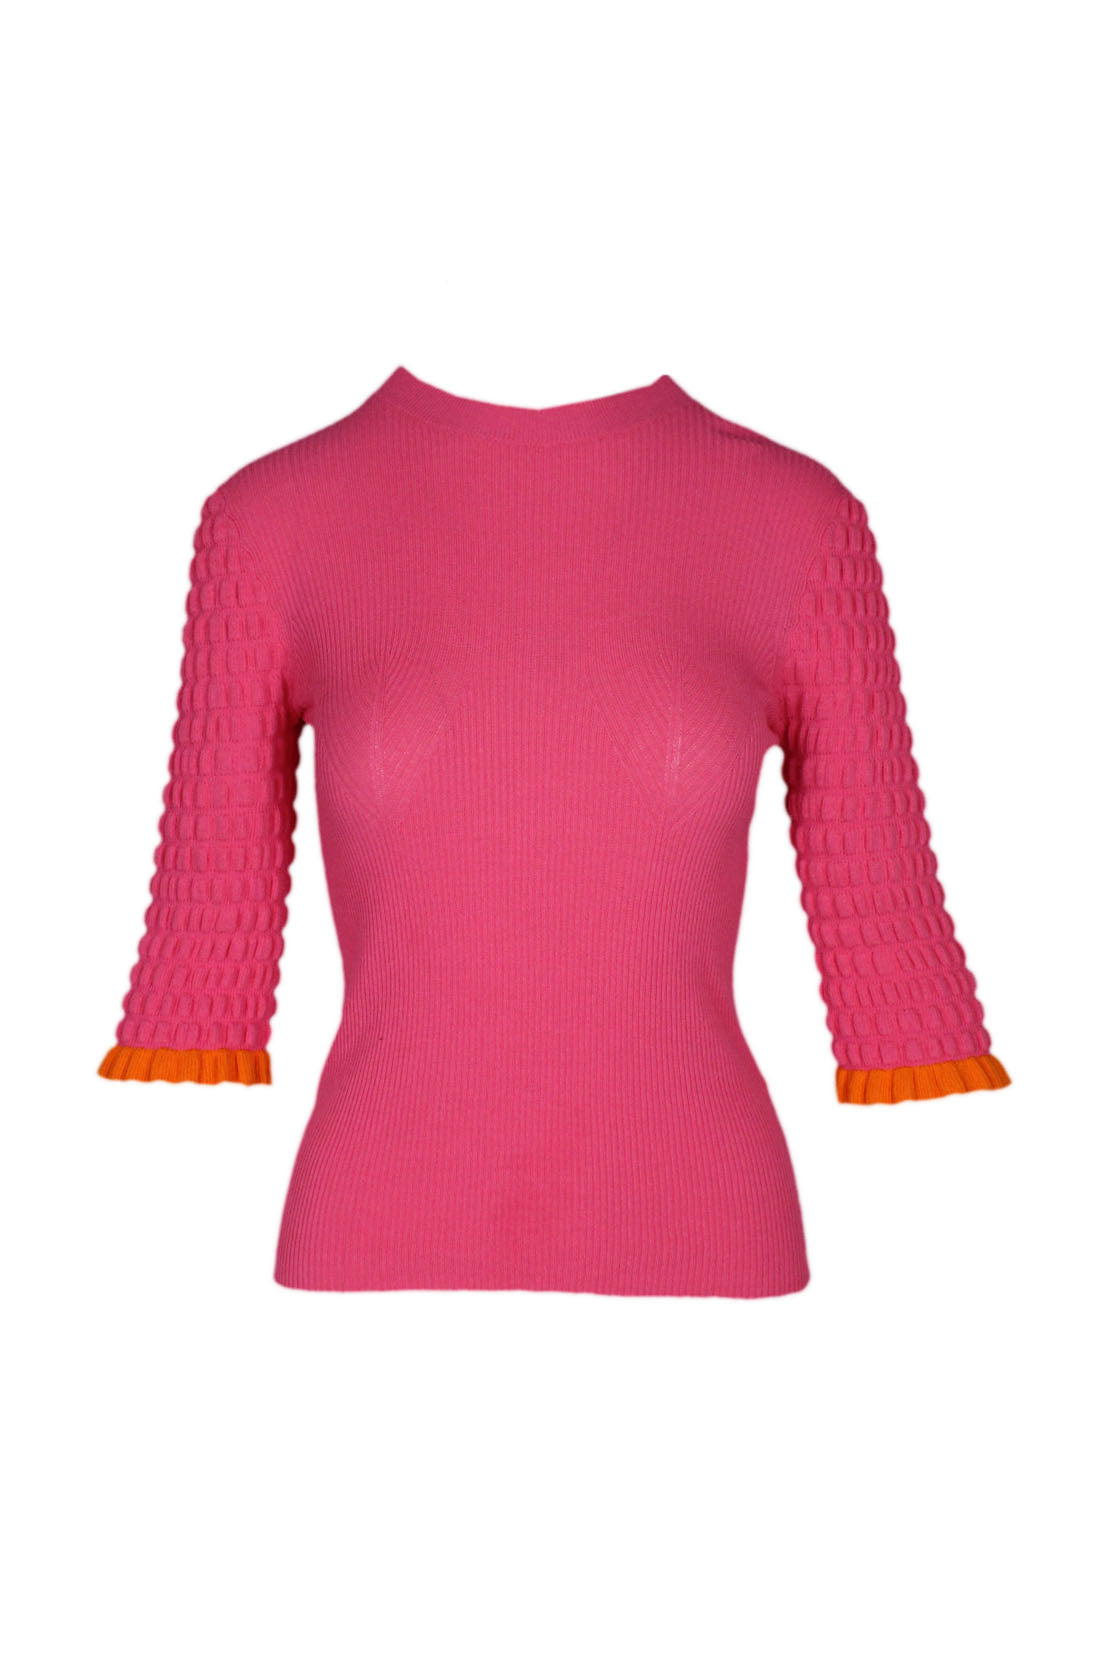 front of see by chloe hot pink ribbed sweater. features crew neckline, ribbed design throughout, 3/4 sleeves, contrasting trim in orange, and pull on style.  